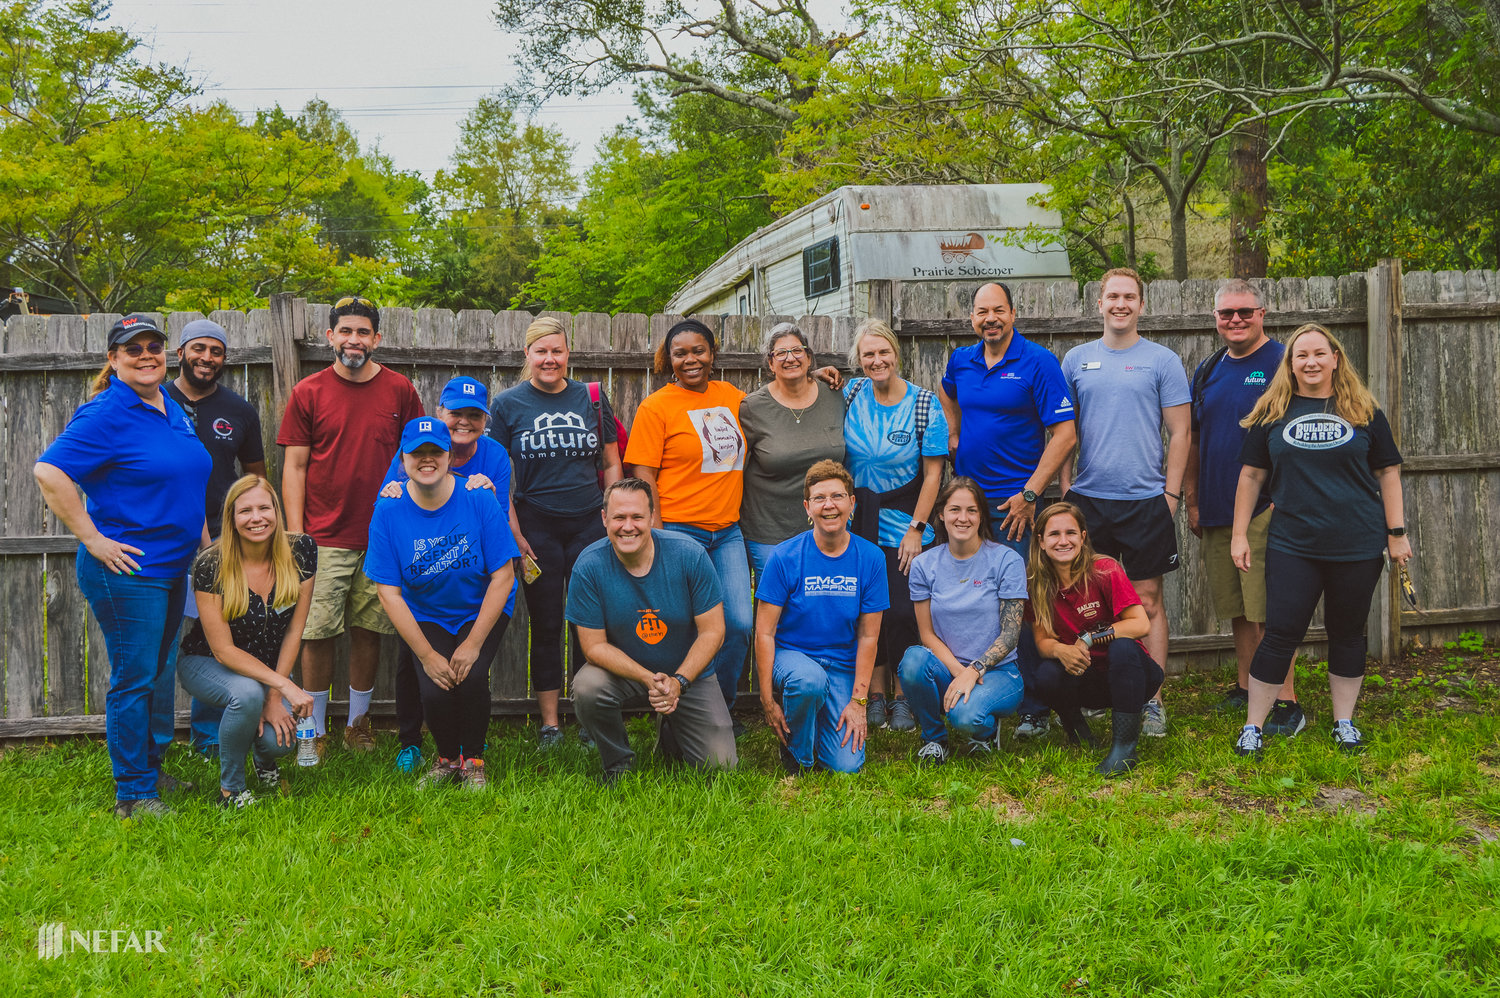 Members of Northeast Florida Association of Realtors turned out to build two decks and wheelchair access ramps for an amputee and his disabled wife at their Southside home March 23.